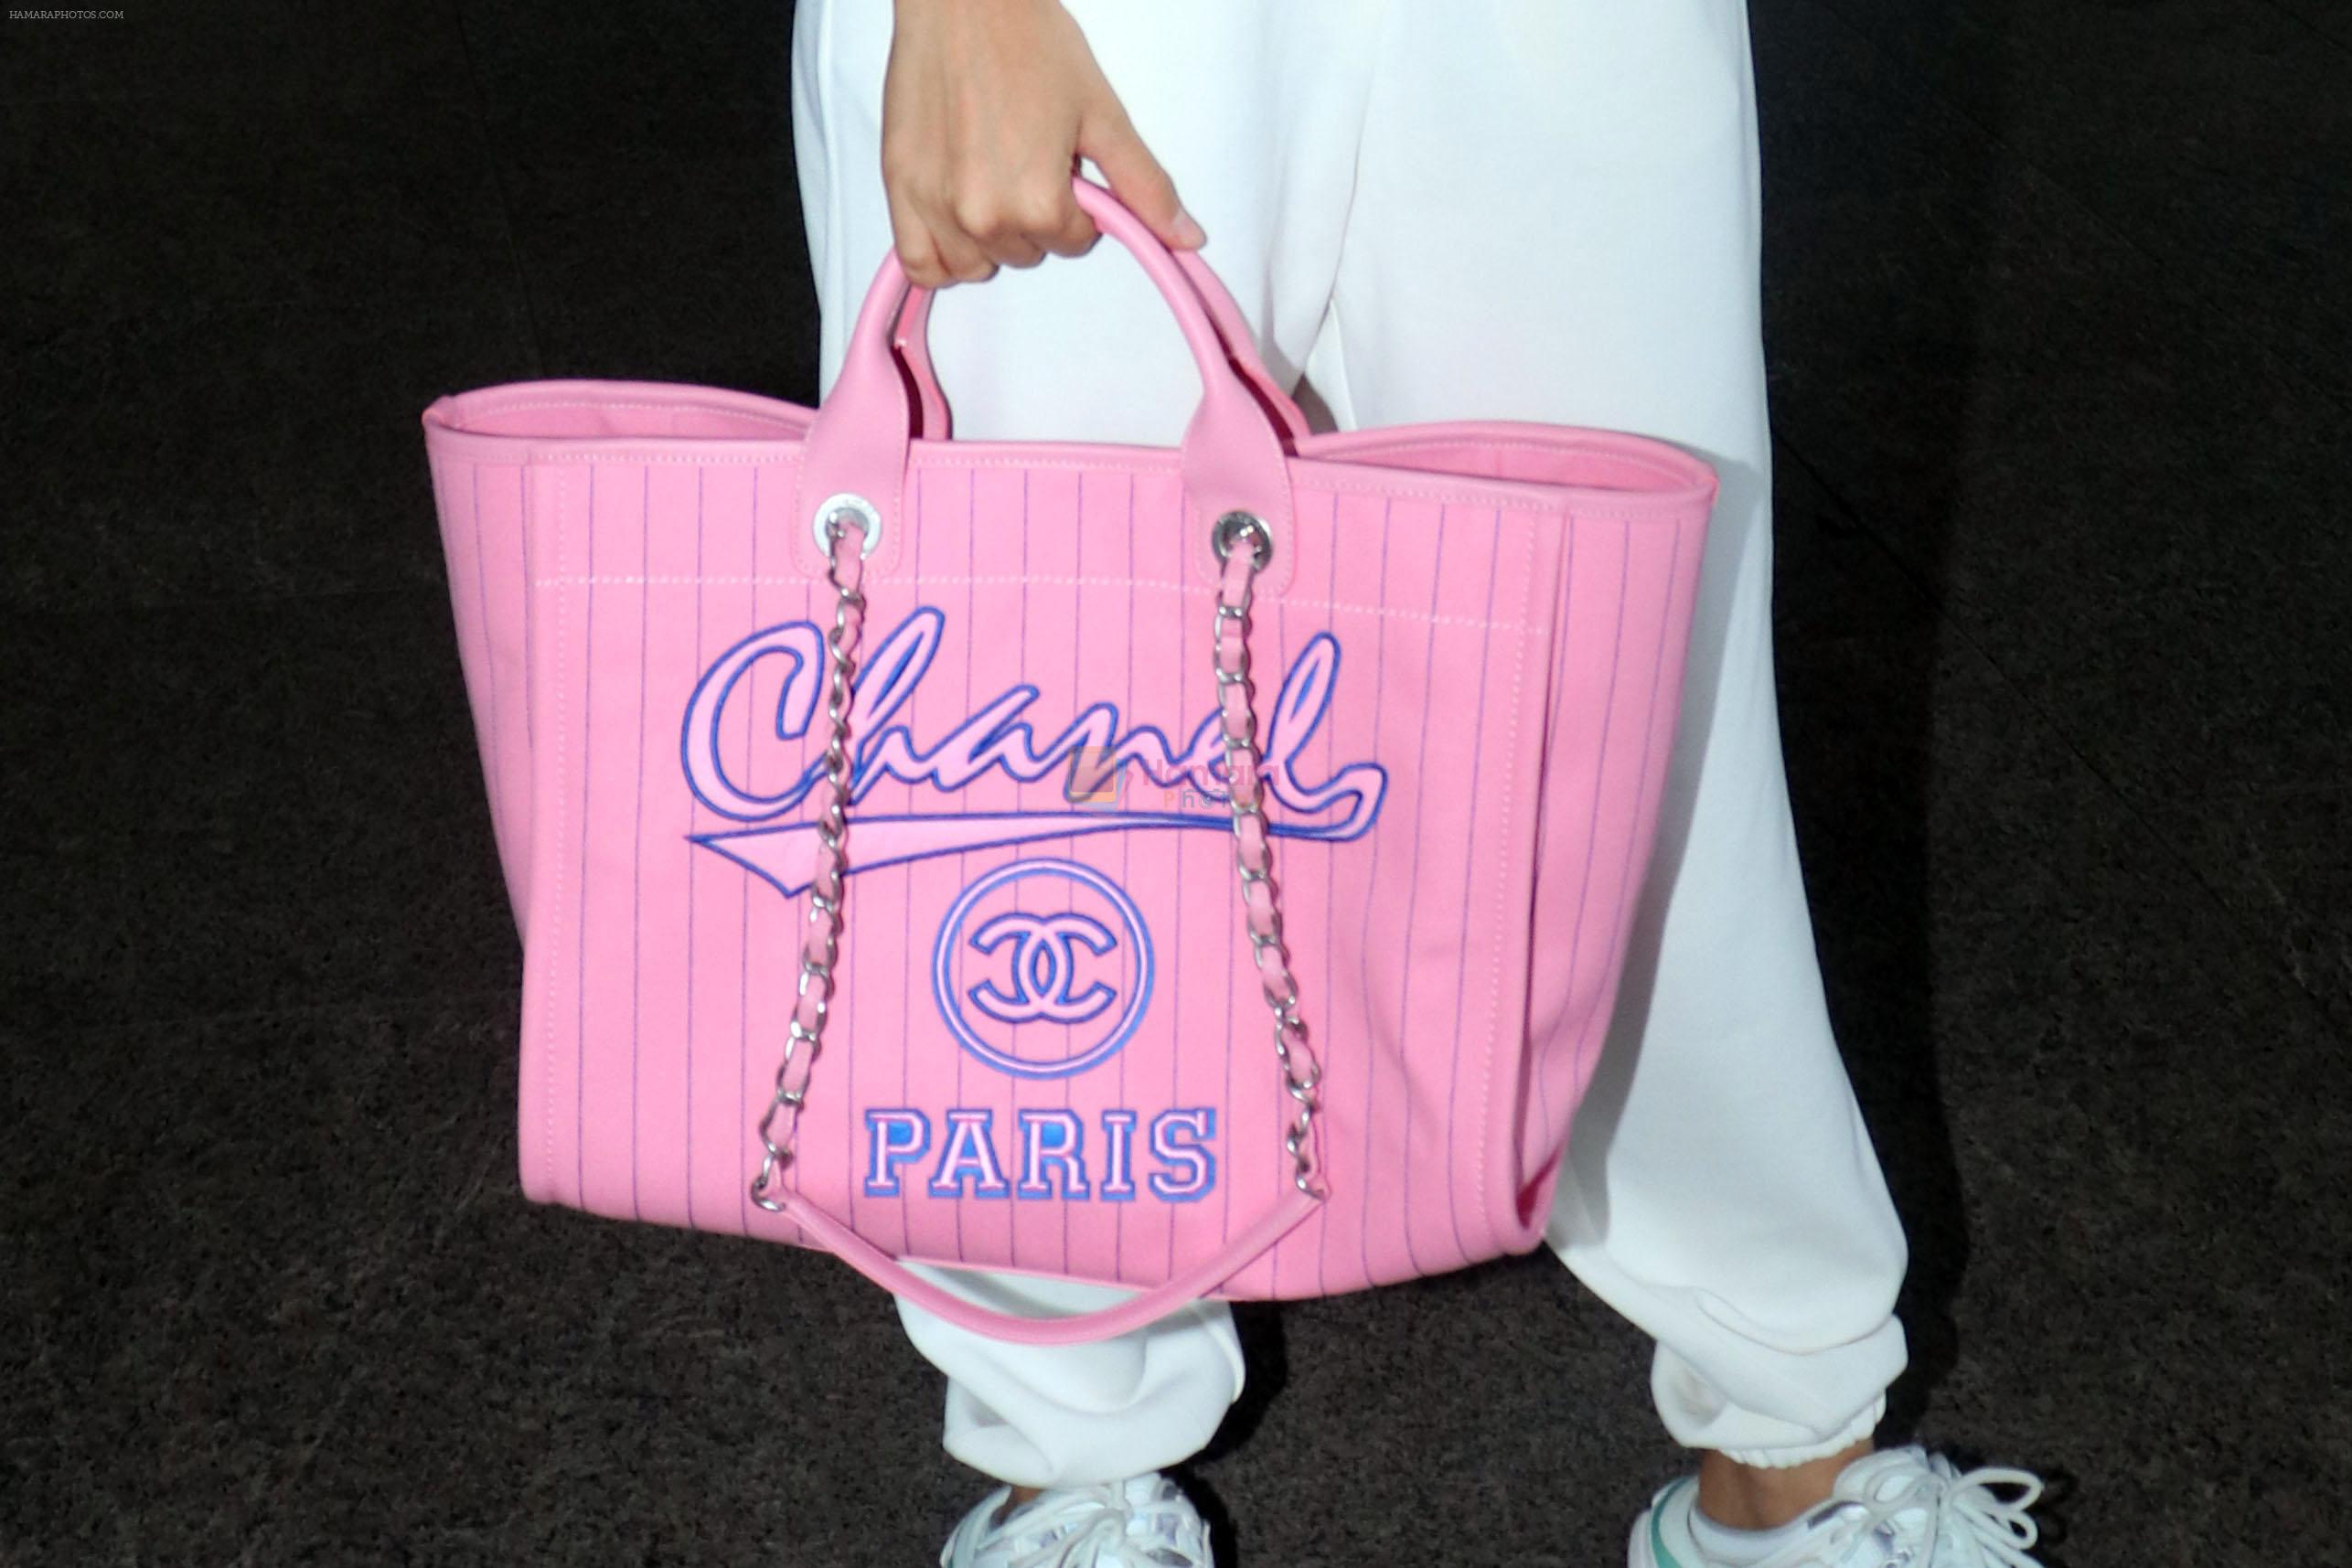 Kiara Advani dressed in a cream top and white pant holding pink Chanel Paris Handbag seen at the airport on 25 Jun 2023